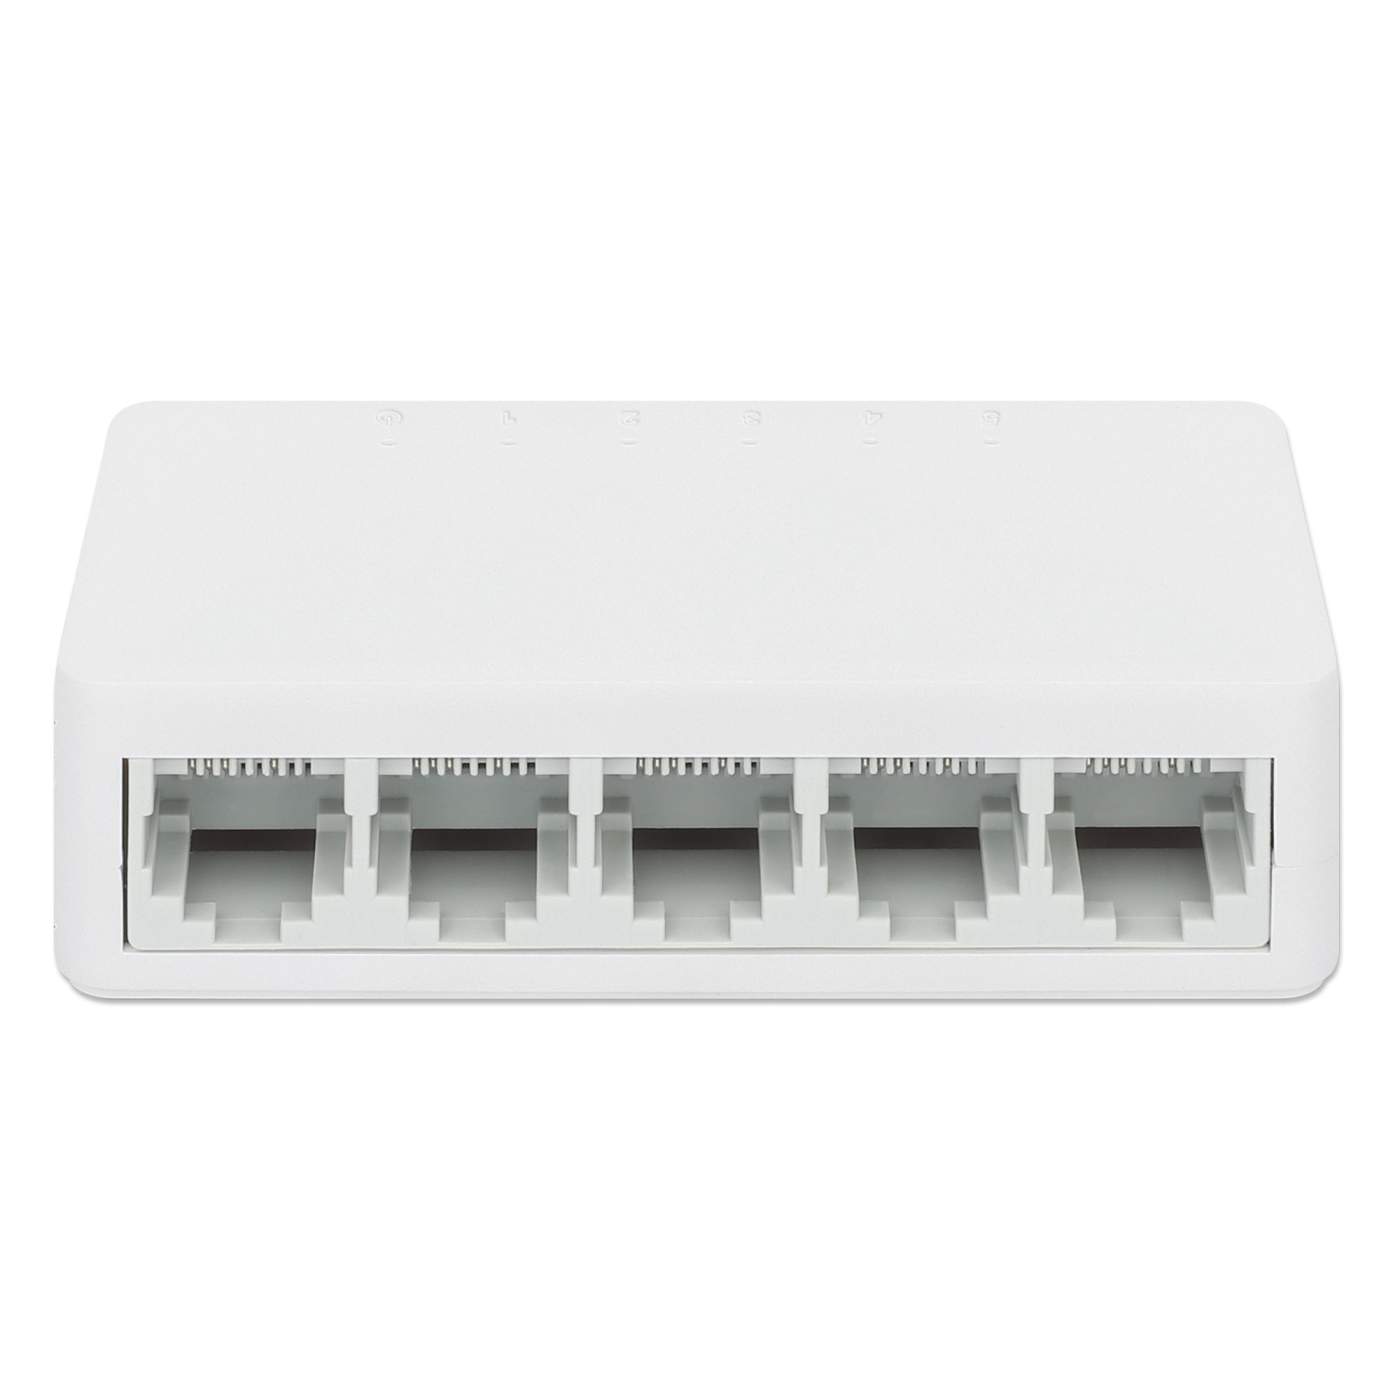 5-Port Fast Ethernet Switch Image 5